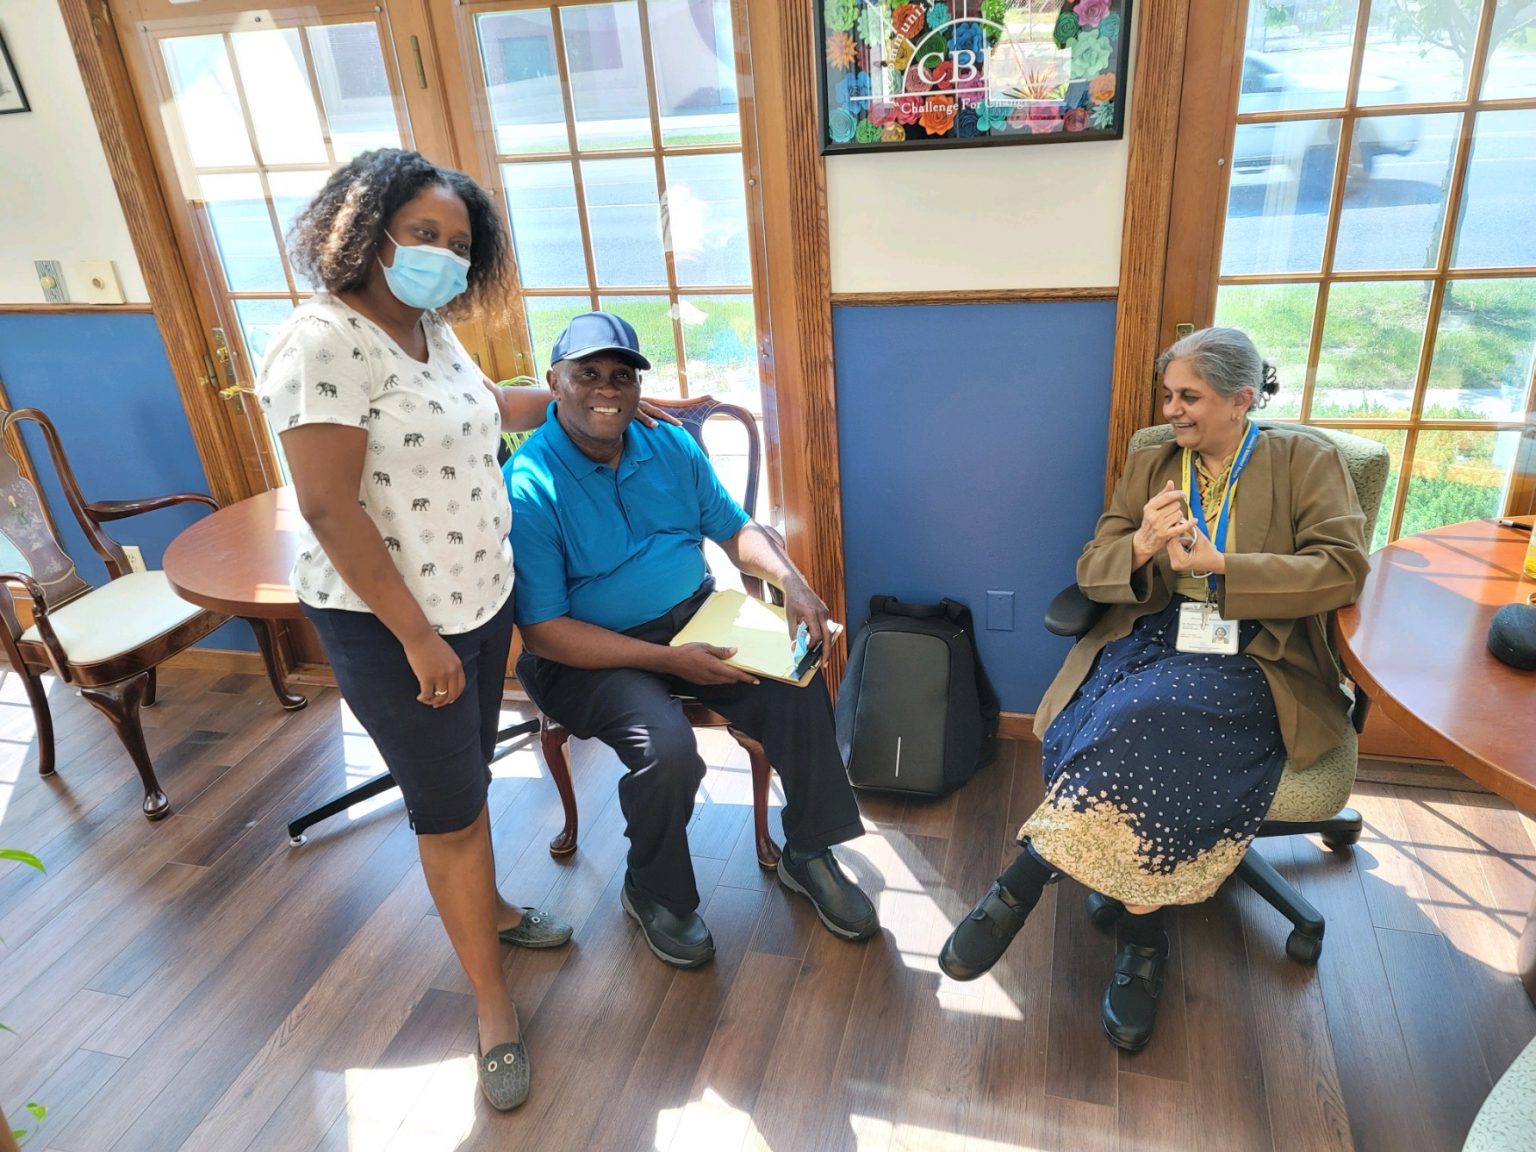 Niharika Khanna, professor of Family and Community Medicine at UMSOM, meets with community leaders at the Community Behavioral Health facility on Maryland’s Eastern Shore.